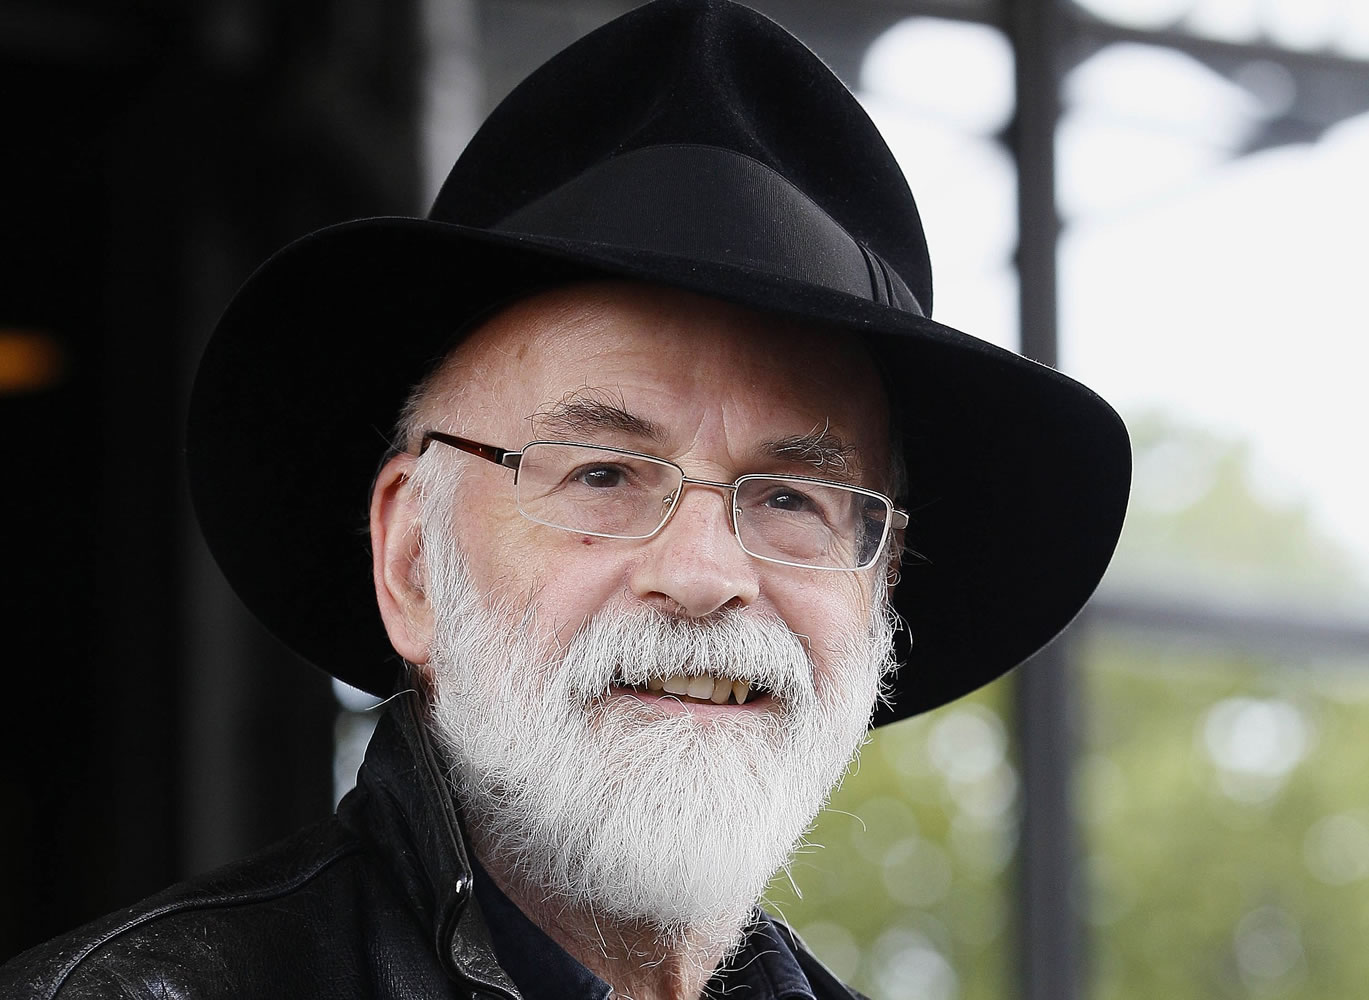 British author Terry Pratchett, creator of the &quot;Discworld&quot; series died Thursday.